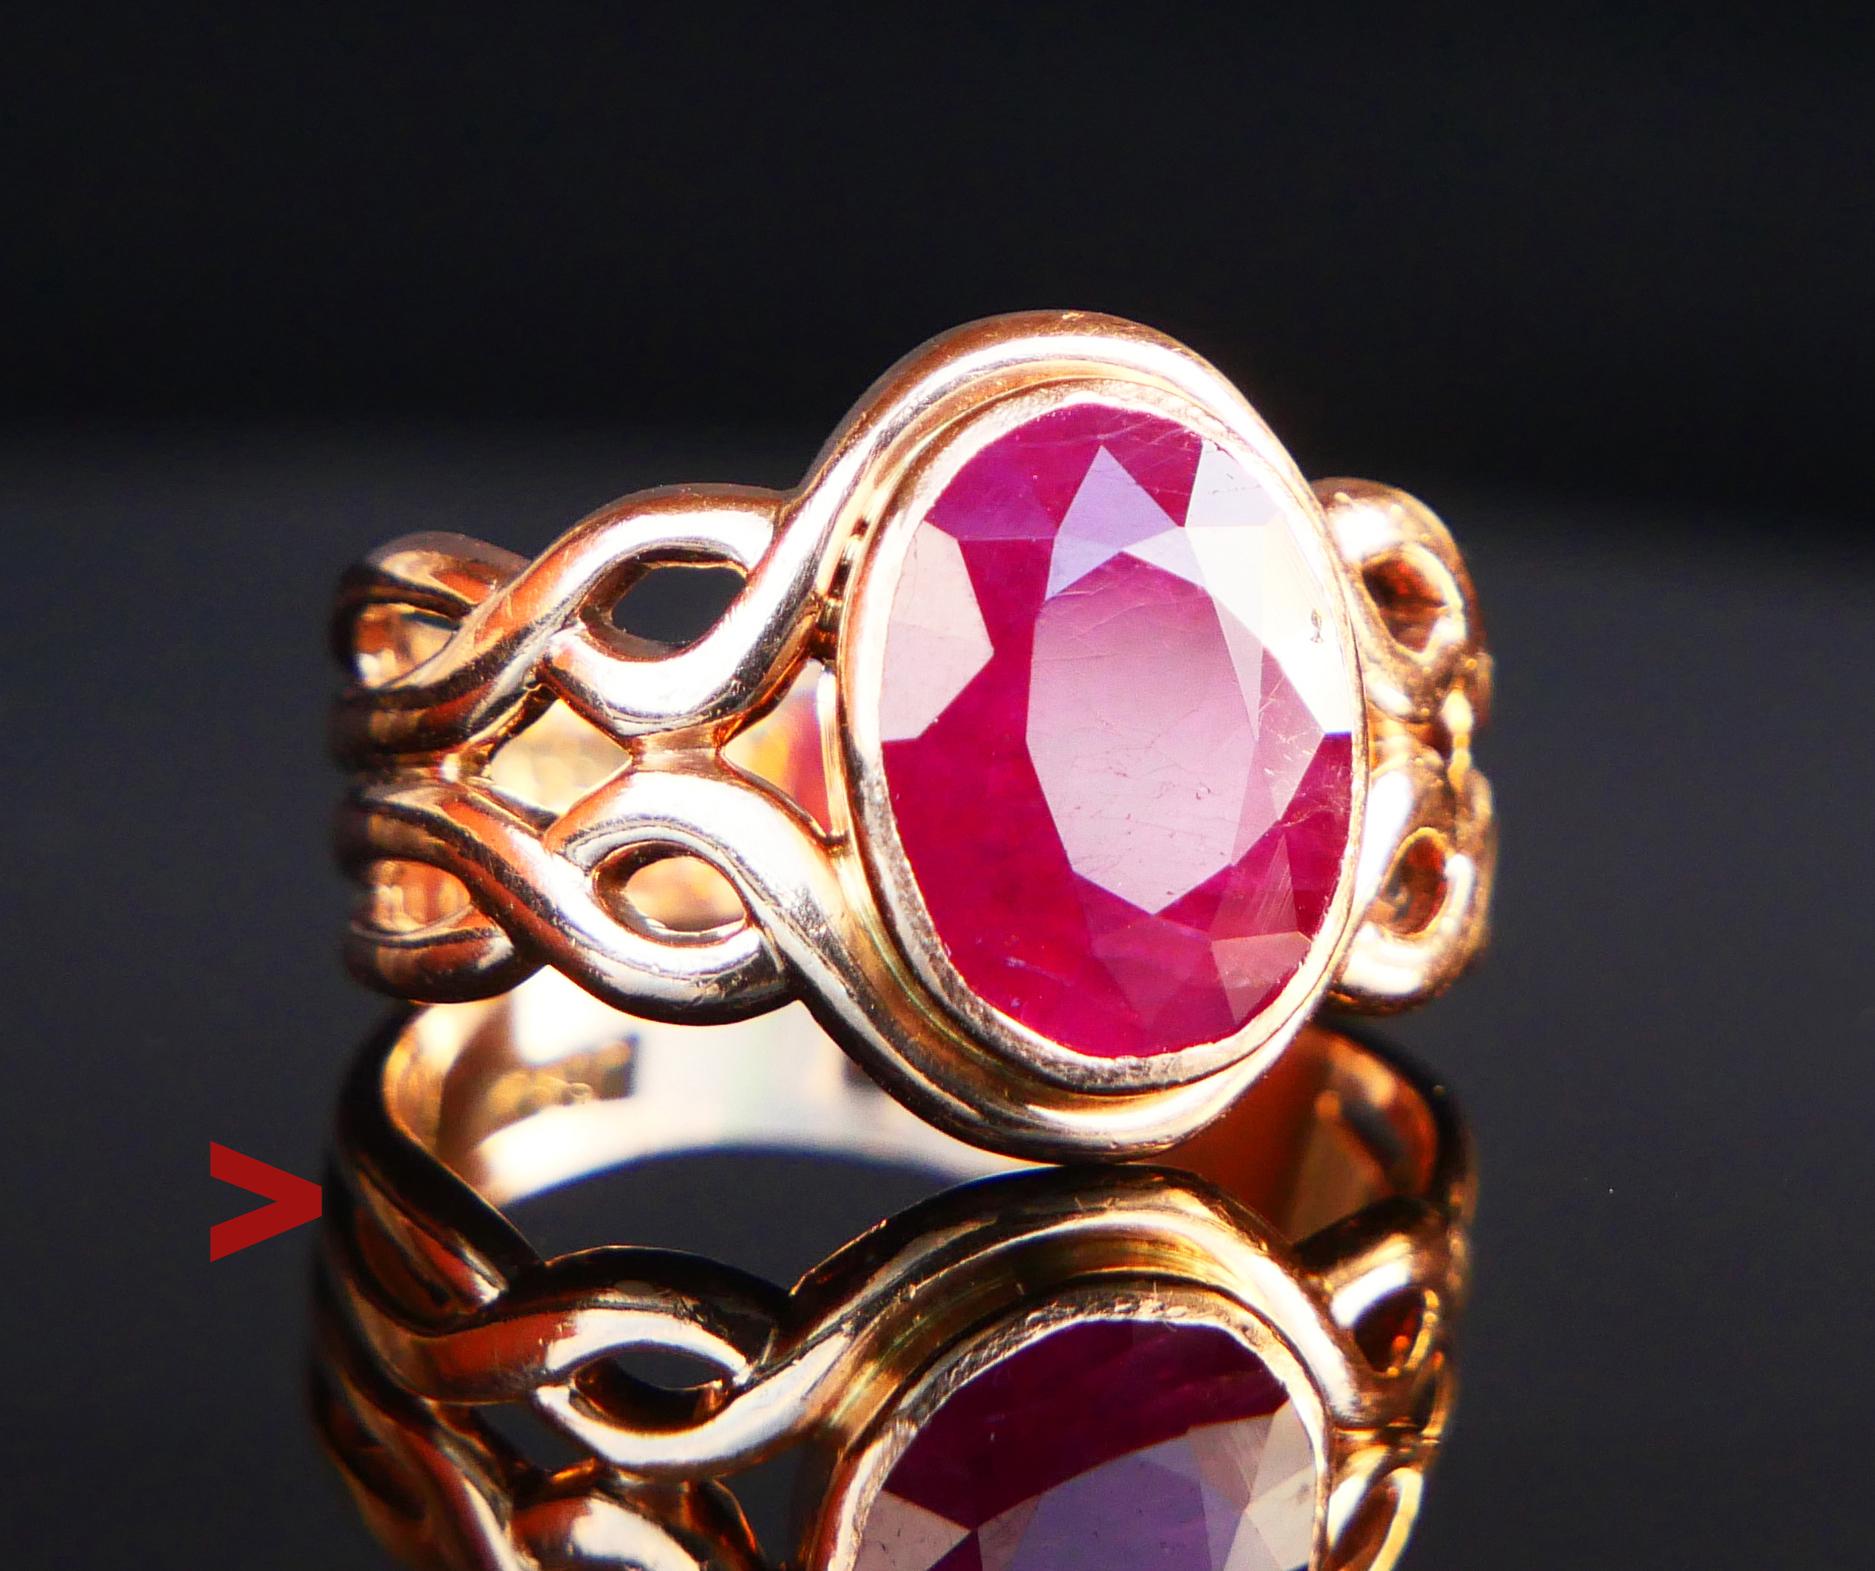 Great looking Danish Ring from ca. 1920- 1940s. Unisex type.

Wide openwork band with bezel set natural Rose Red Ruby 11 mm x 8 mm x 5 mm deep / ca. 4 ct. Two small natural flaws visible on the surface.

Hallmarked K 585

Used fine condition. Stone